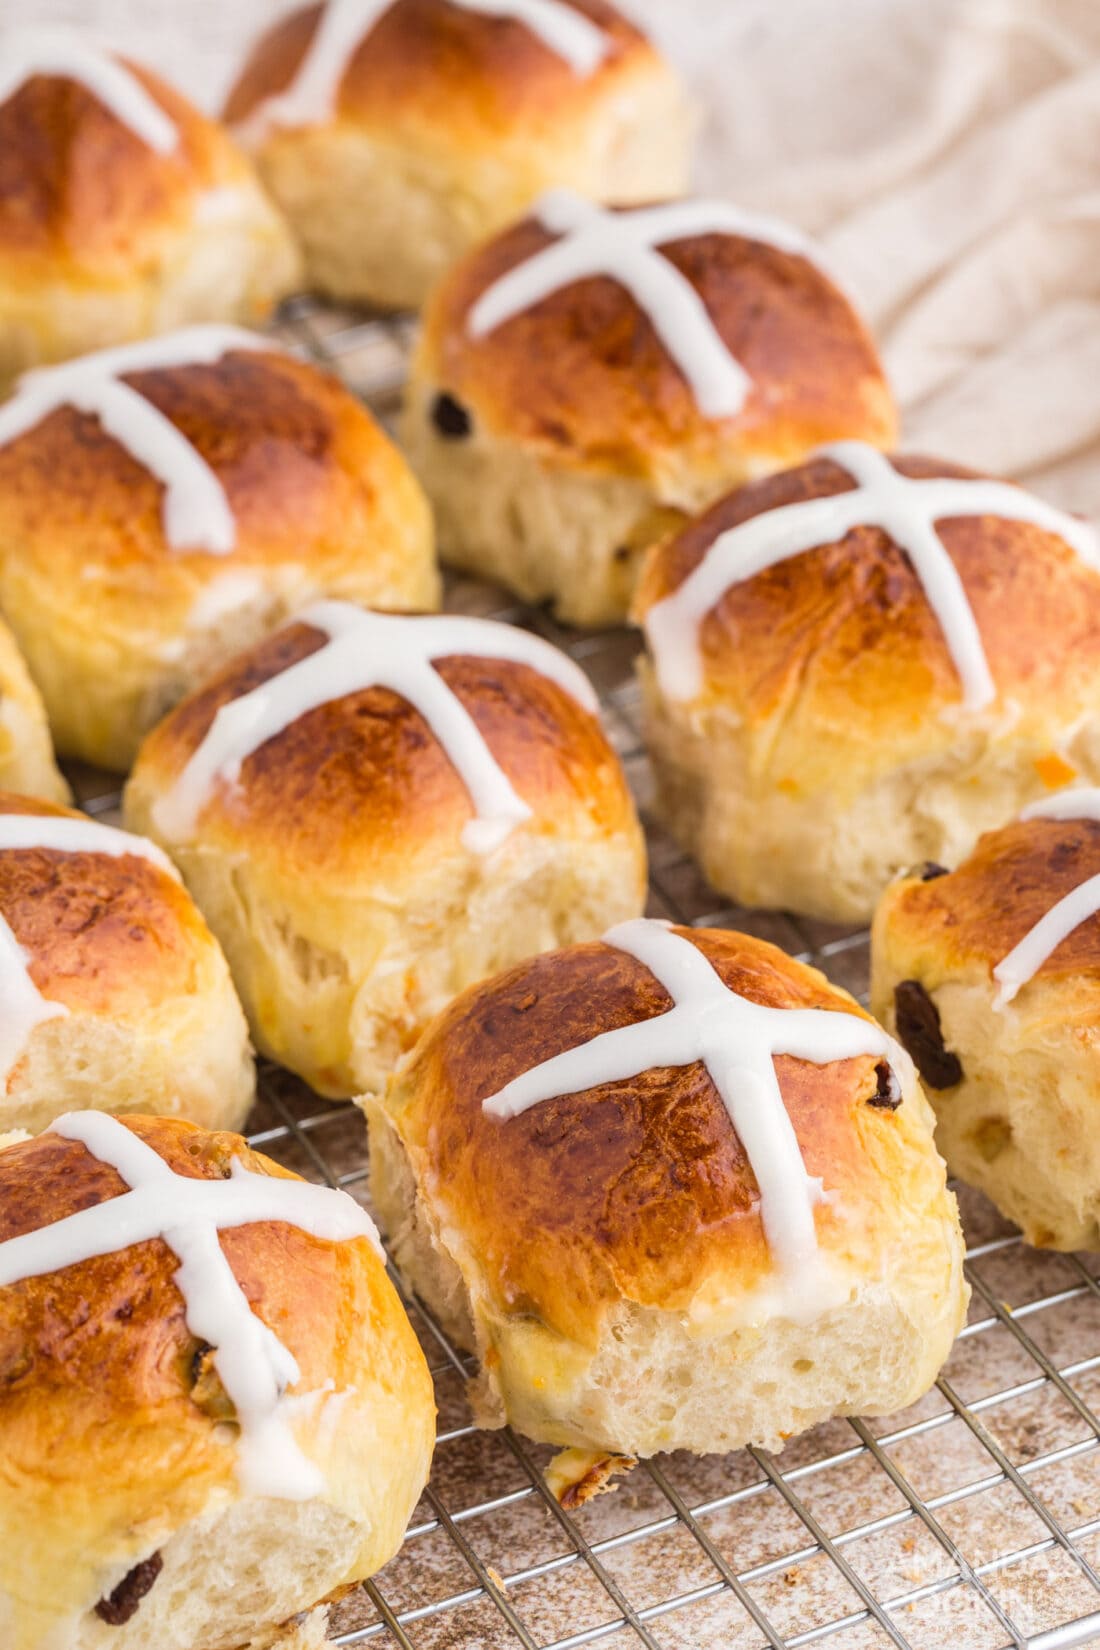 Hot Cross Buns on a wire rack